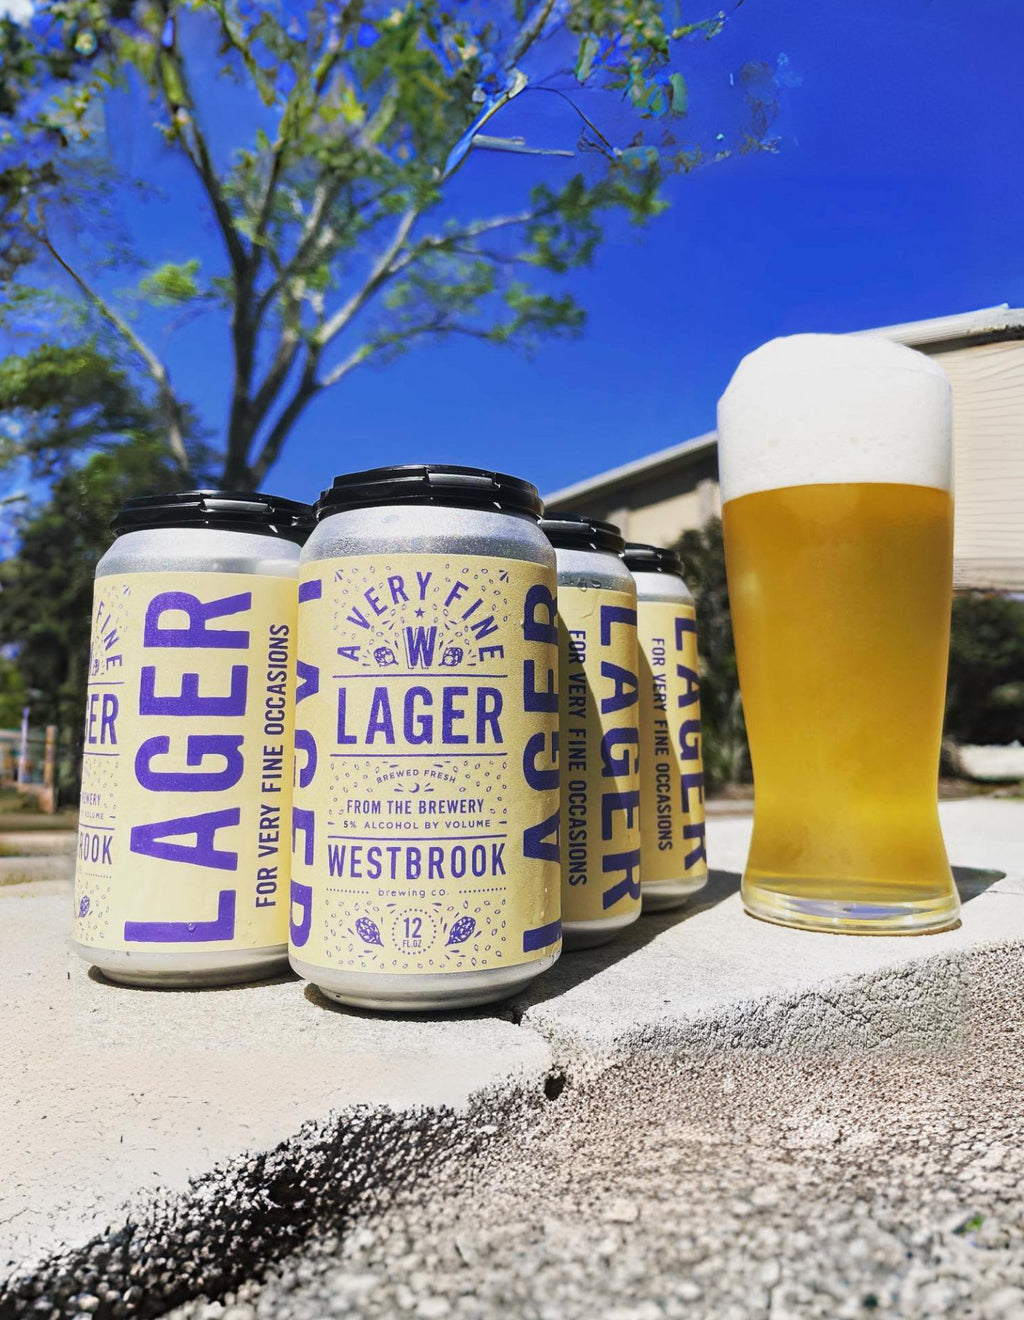 A Very Fine Lager